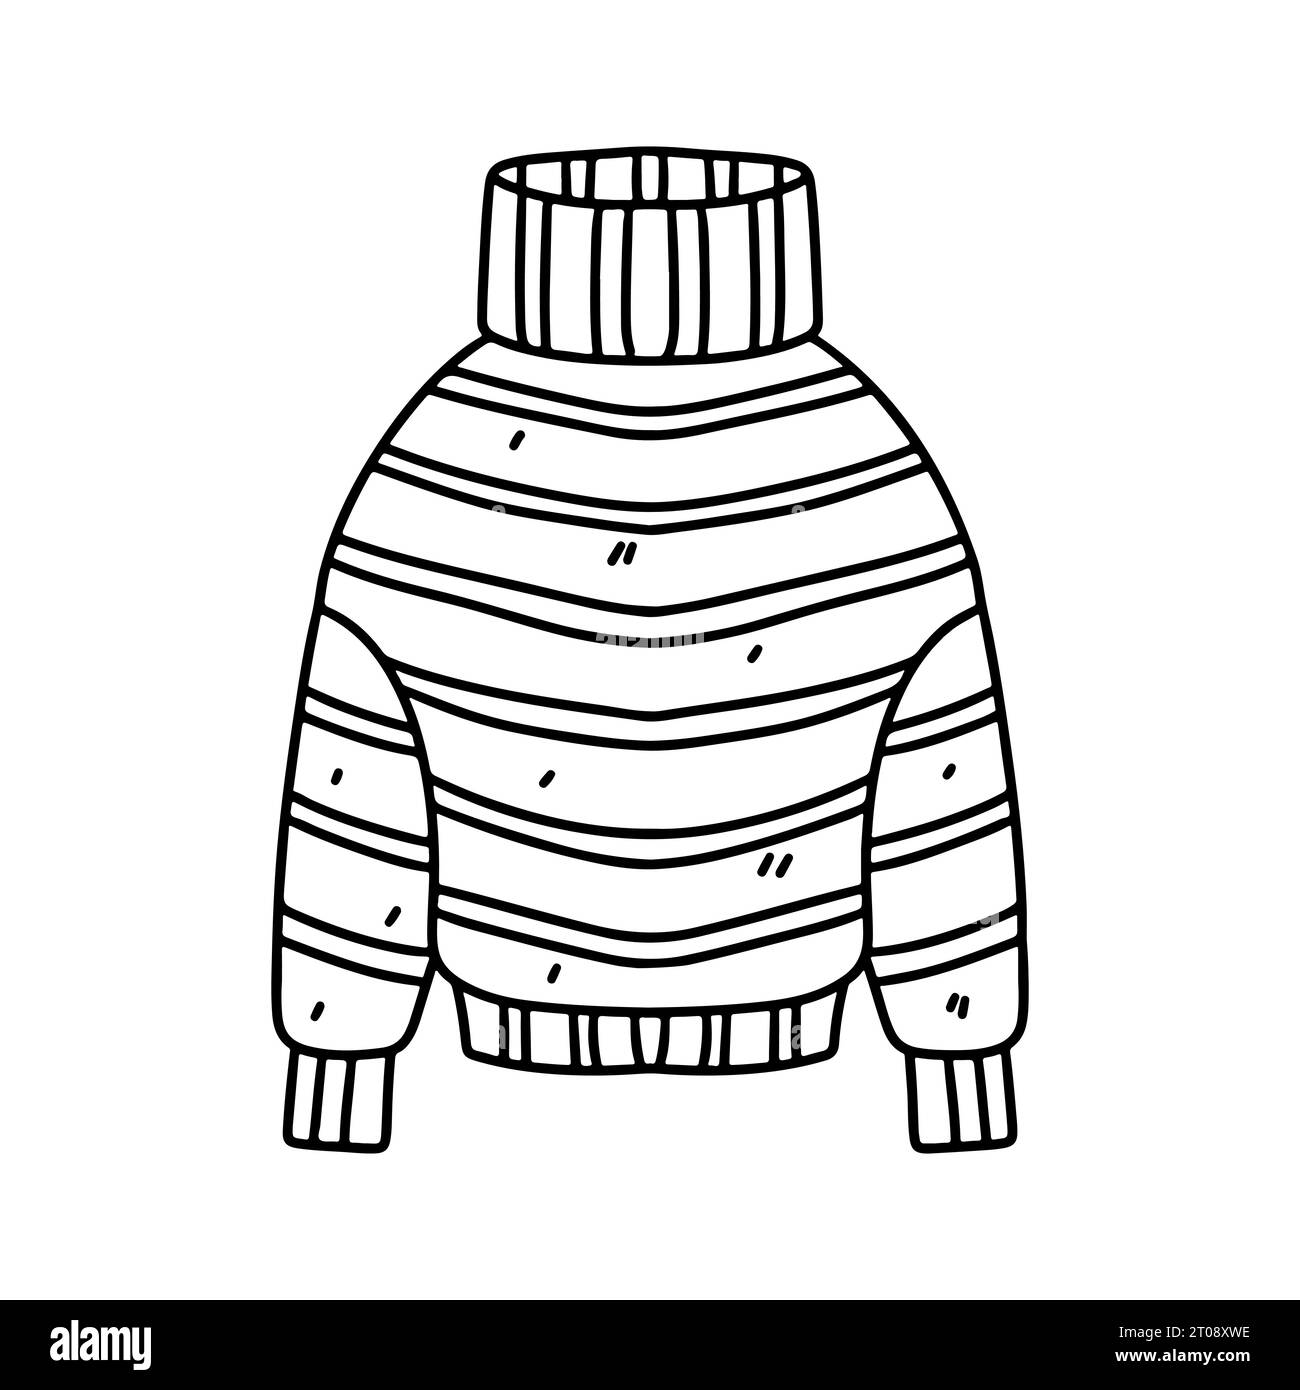 Striped Sweater. Hand drawn doodle style. Vector illustration isolated on white. Coloring page. Stock Vector